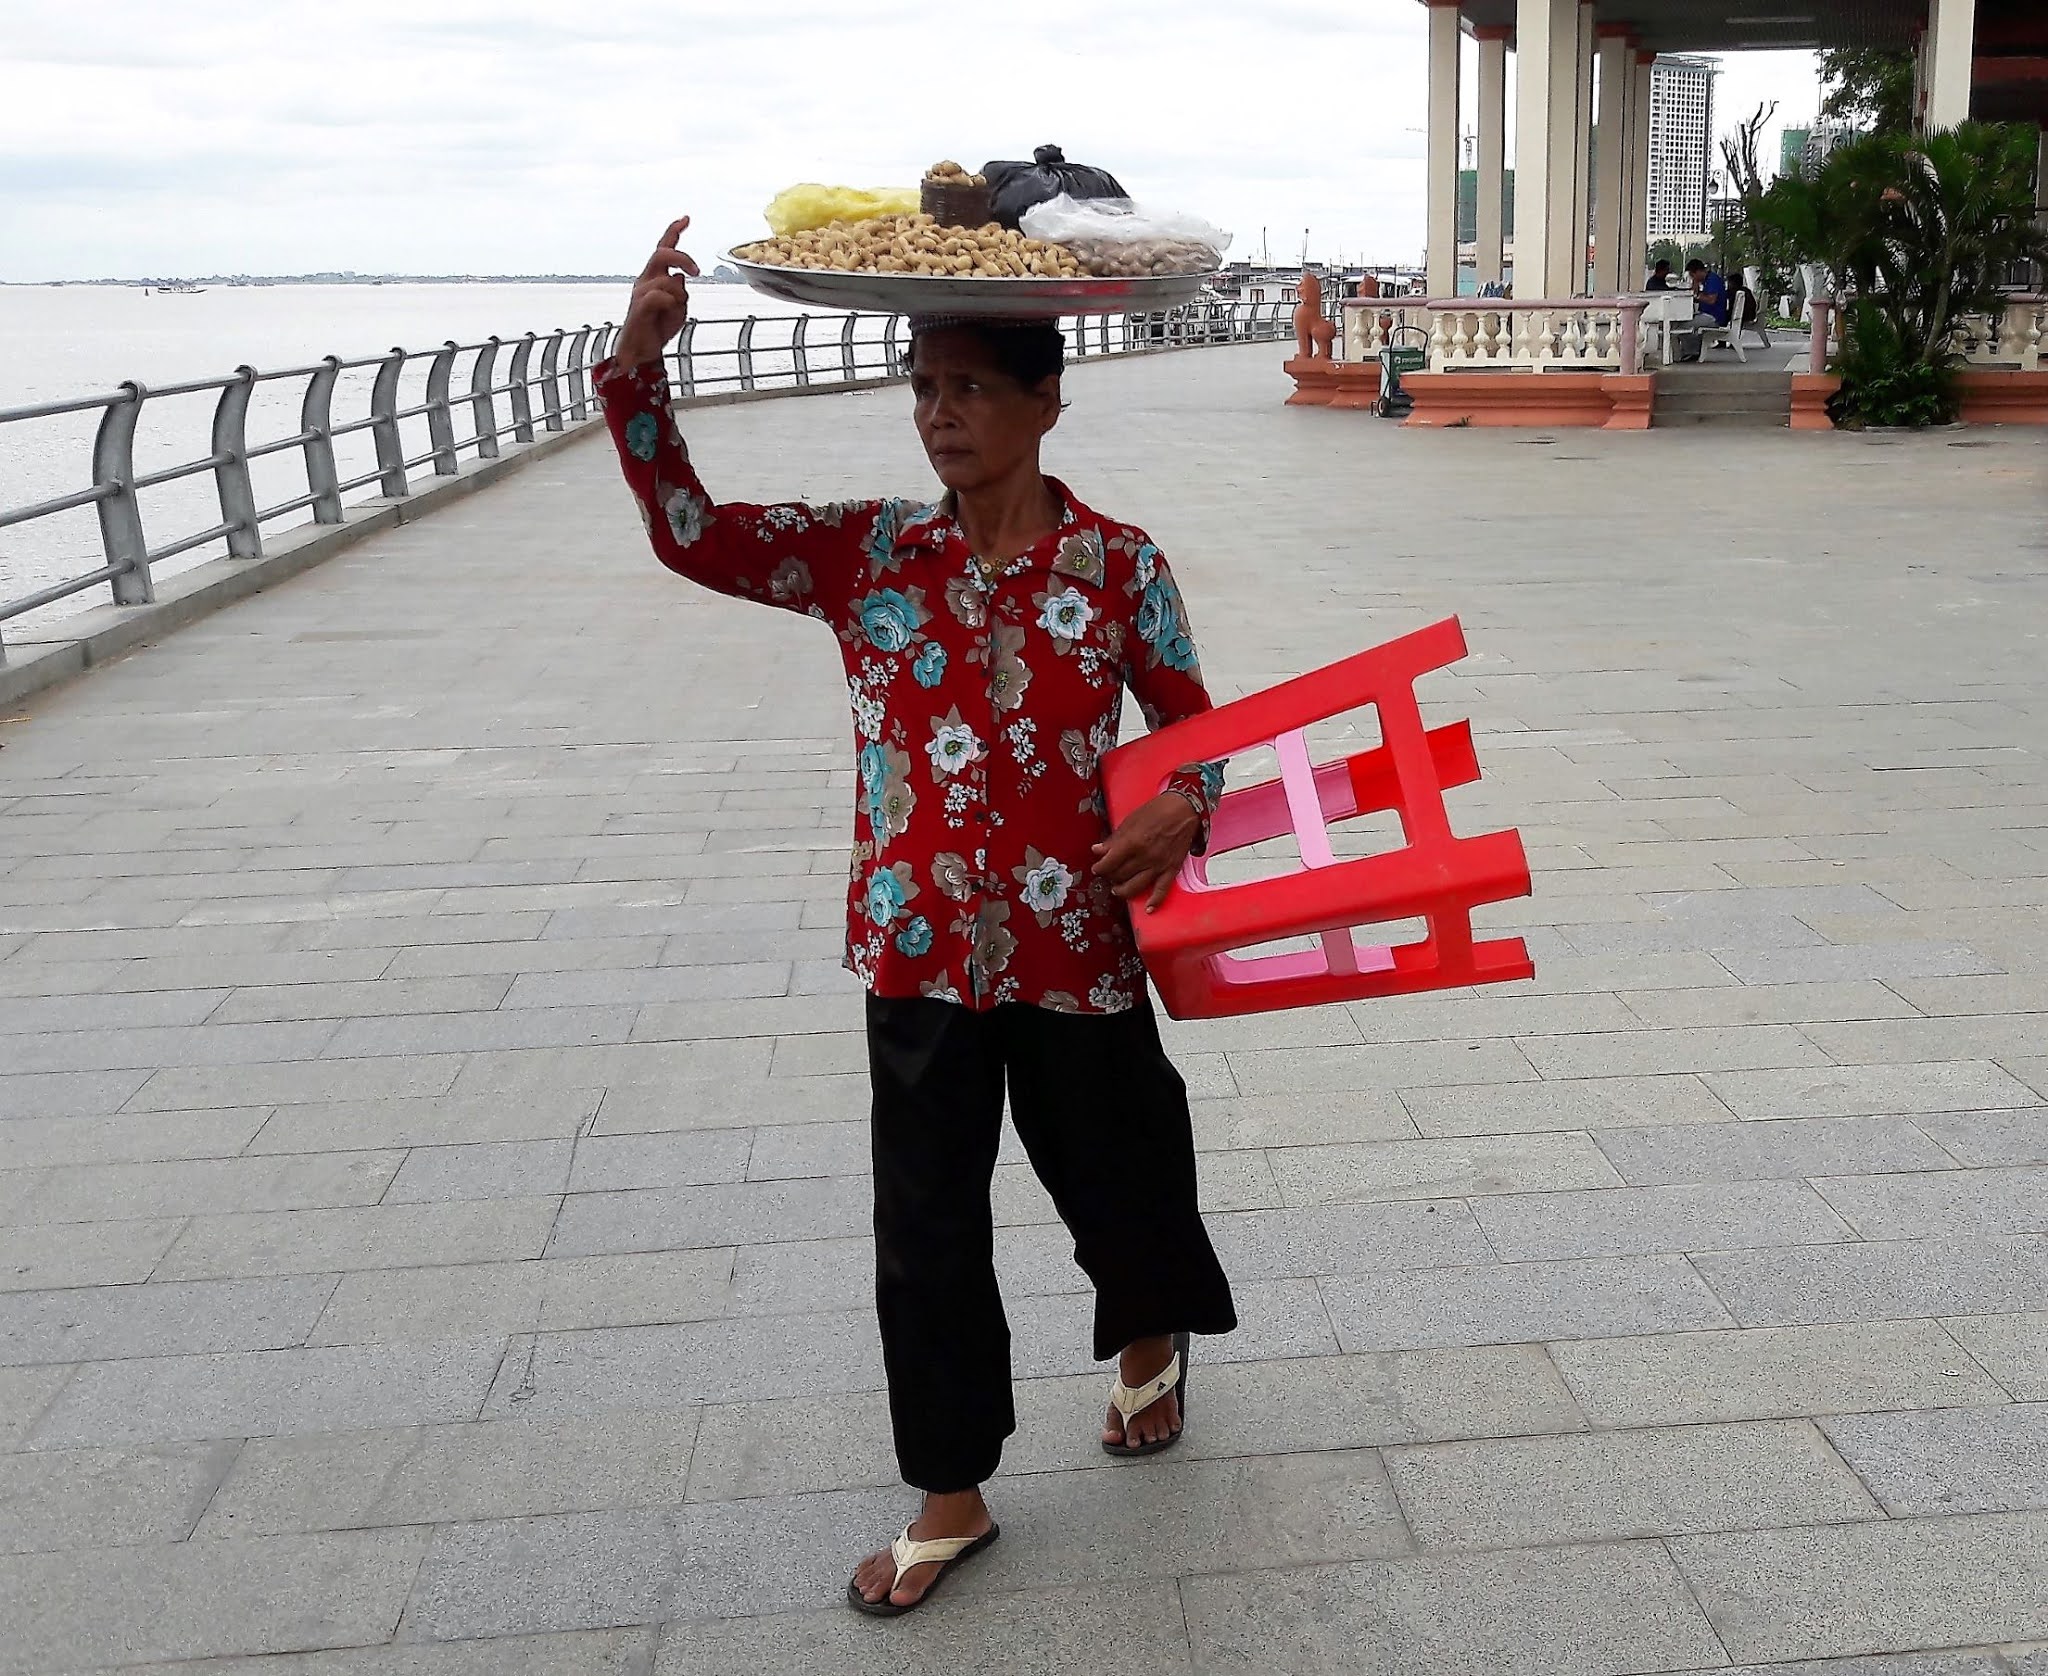 A female vendor walking on the Riverside Path carrying a tray full of nuts on her head